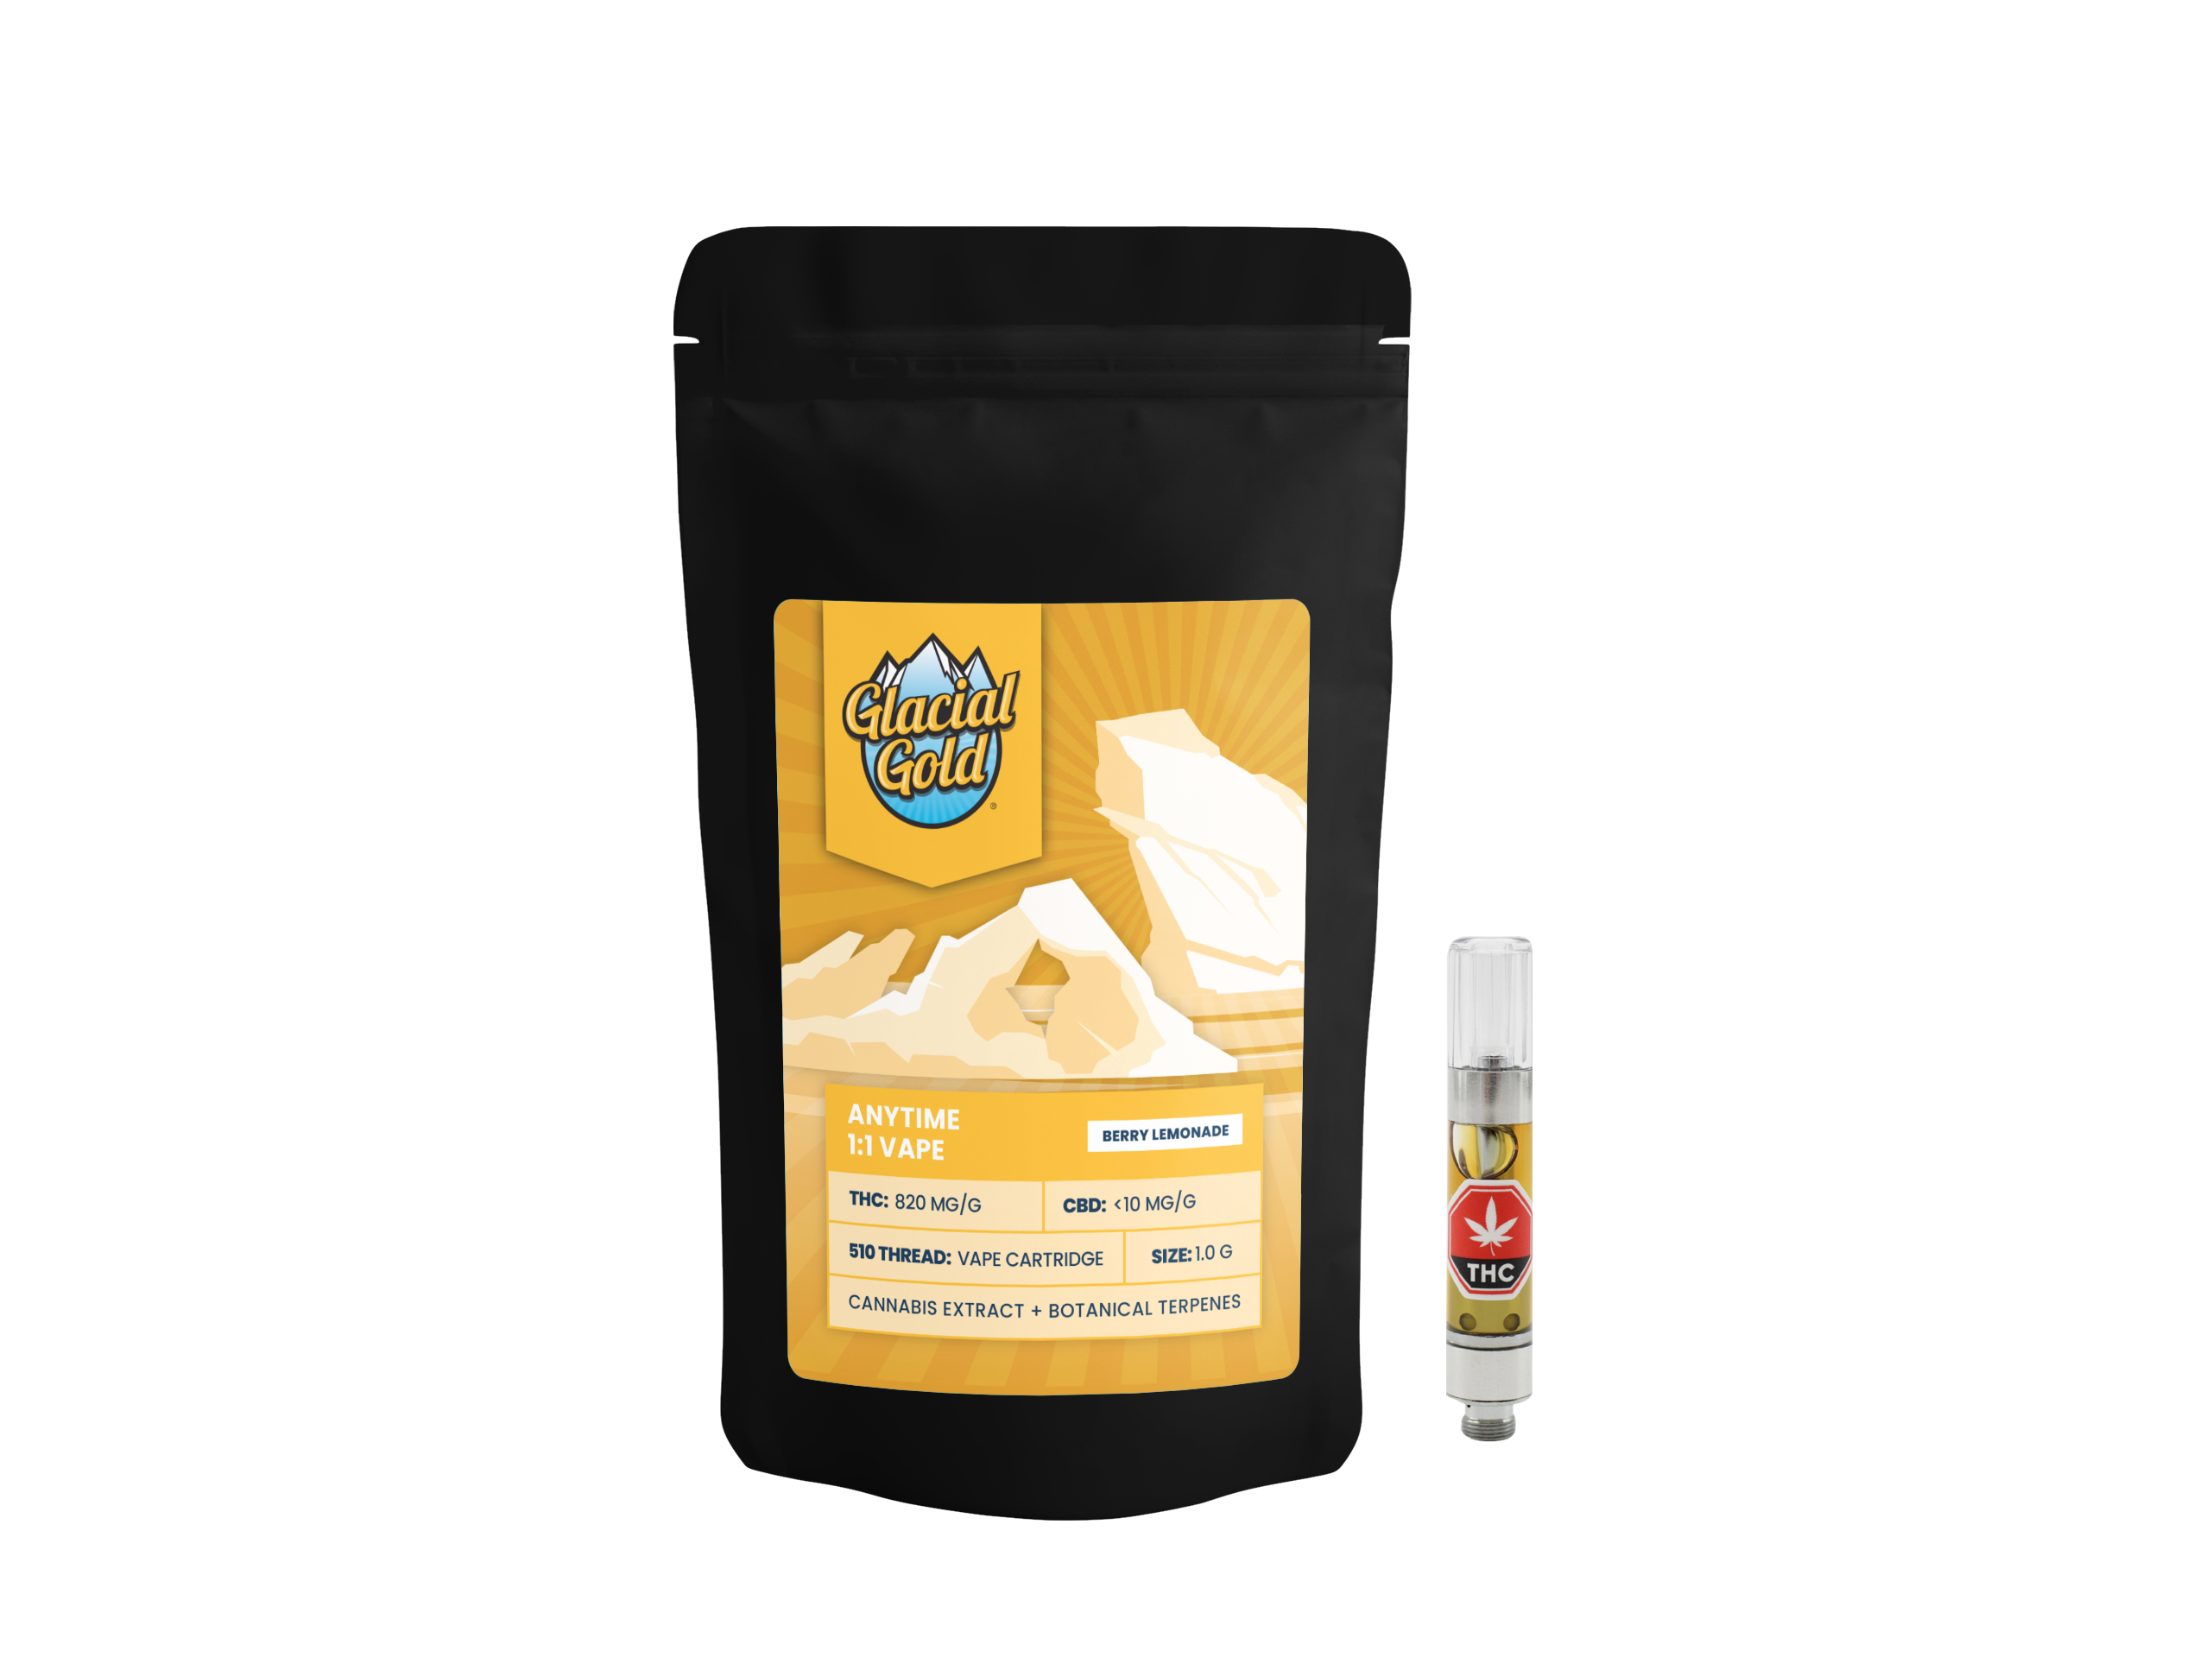 Cannabis Product Glacial Gold - Anytime 1:1 Berry Lemonade 1g Vape by Glacial Gold